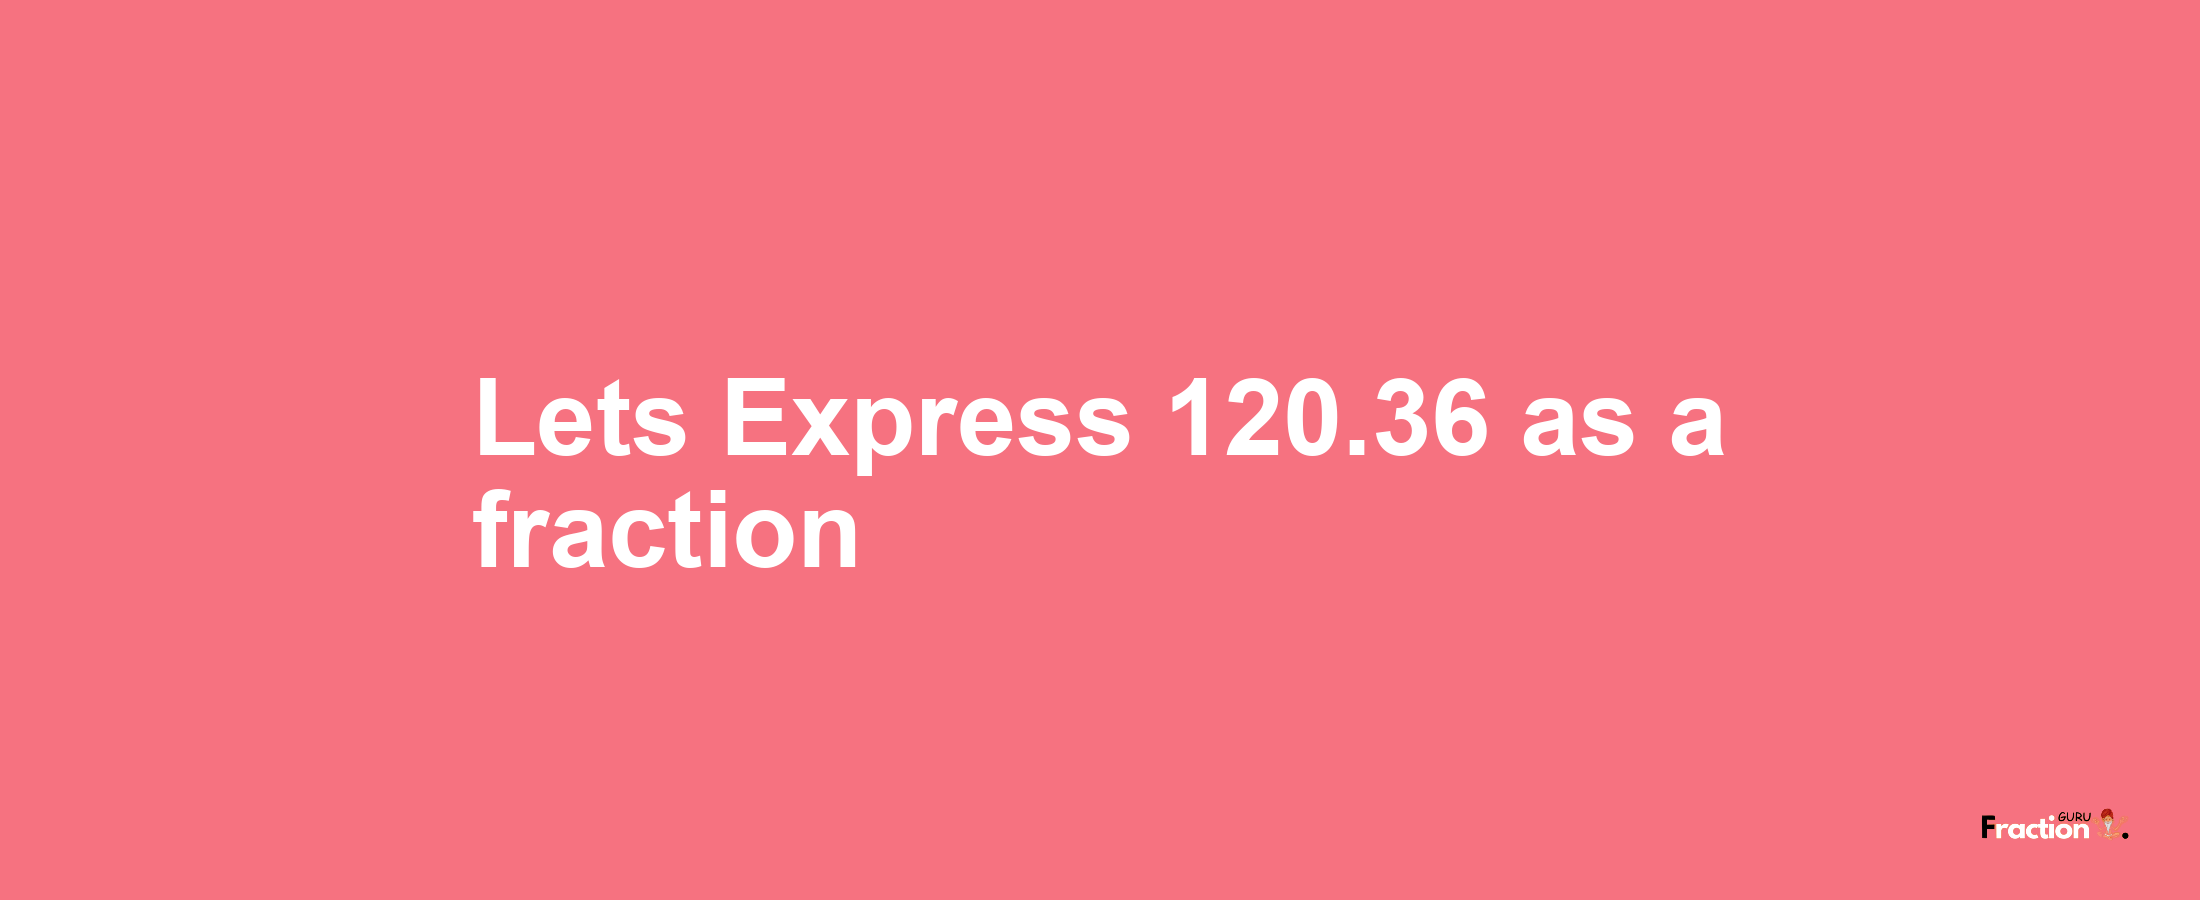 Lets Express 120.36 as afraction